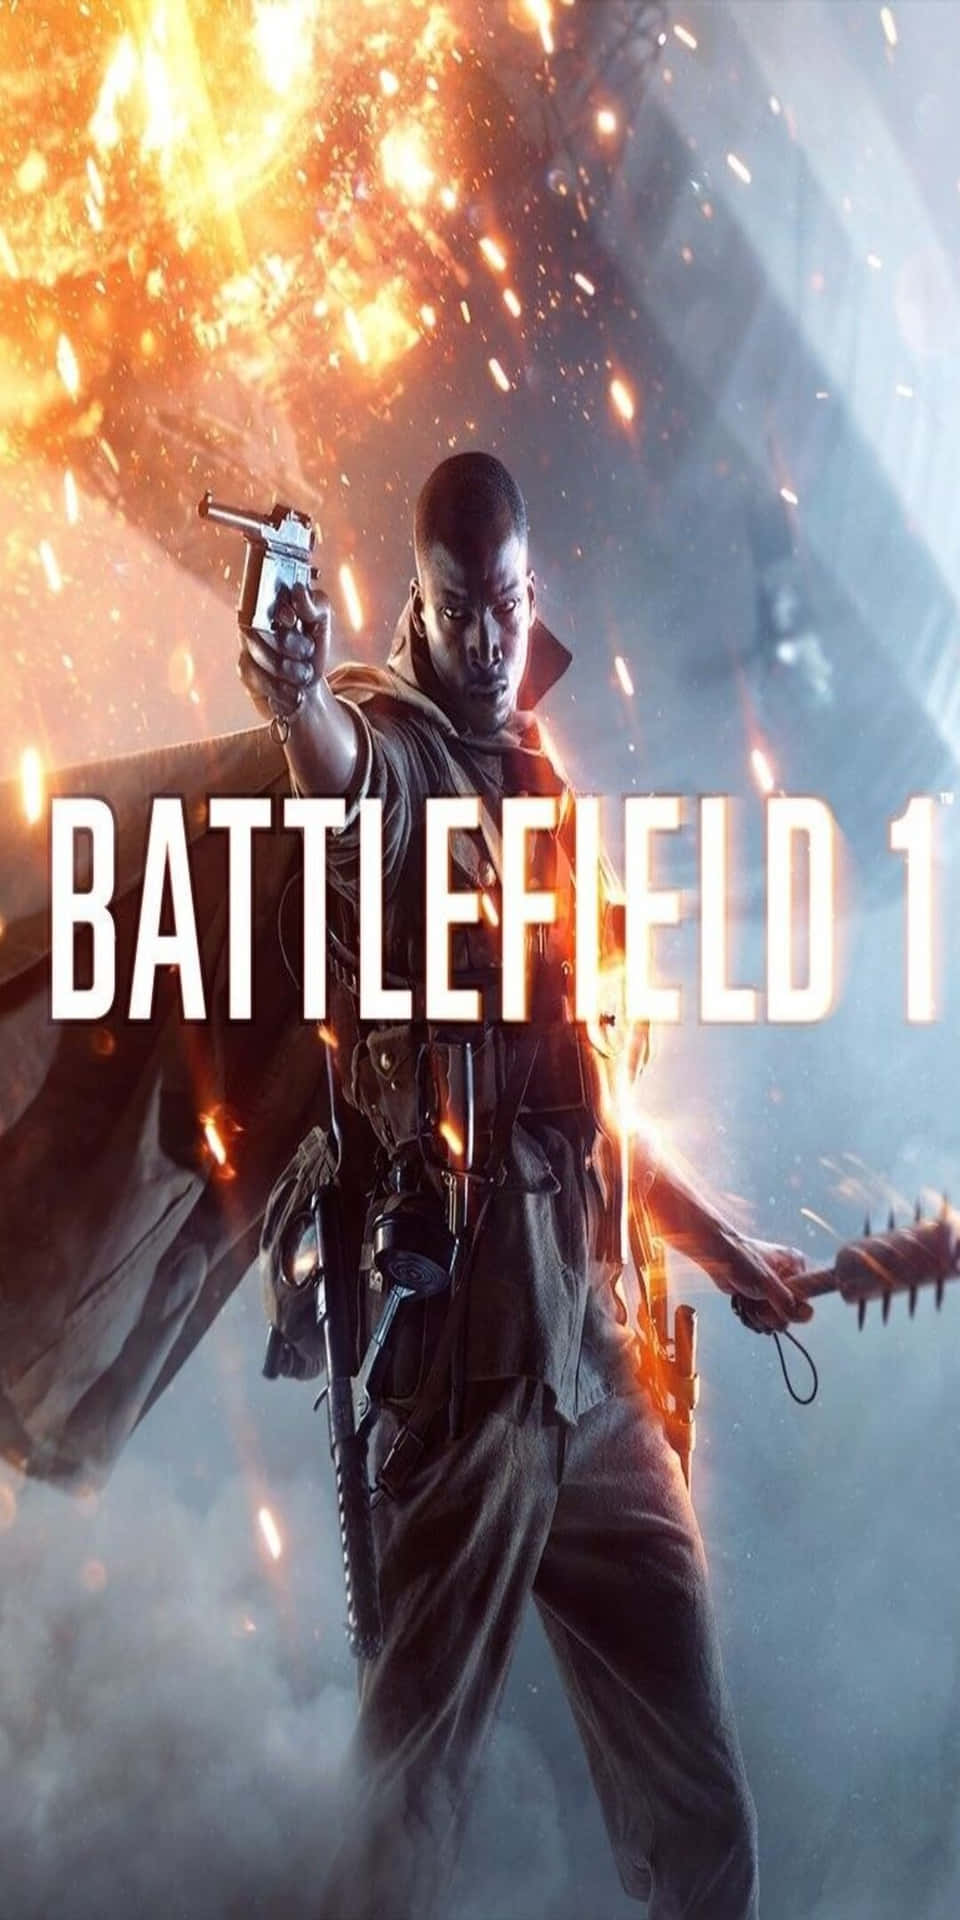 Pixel 3 for a Battlefield 1 gaming experience